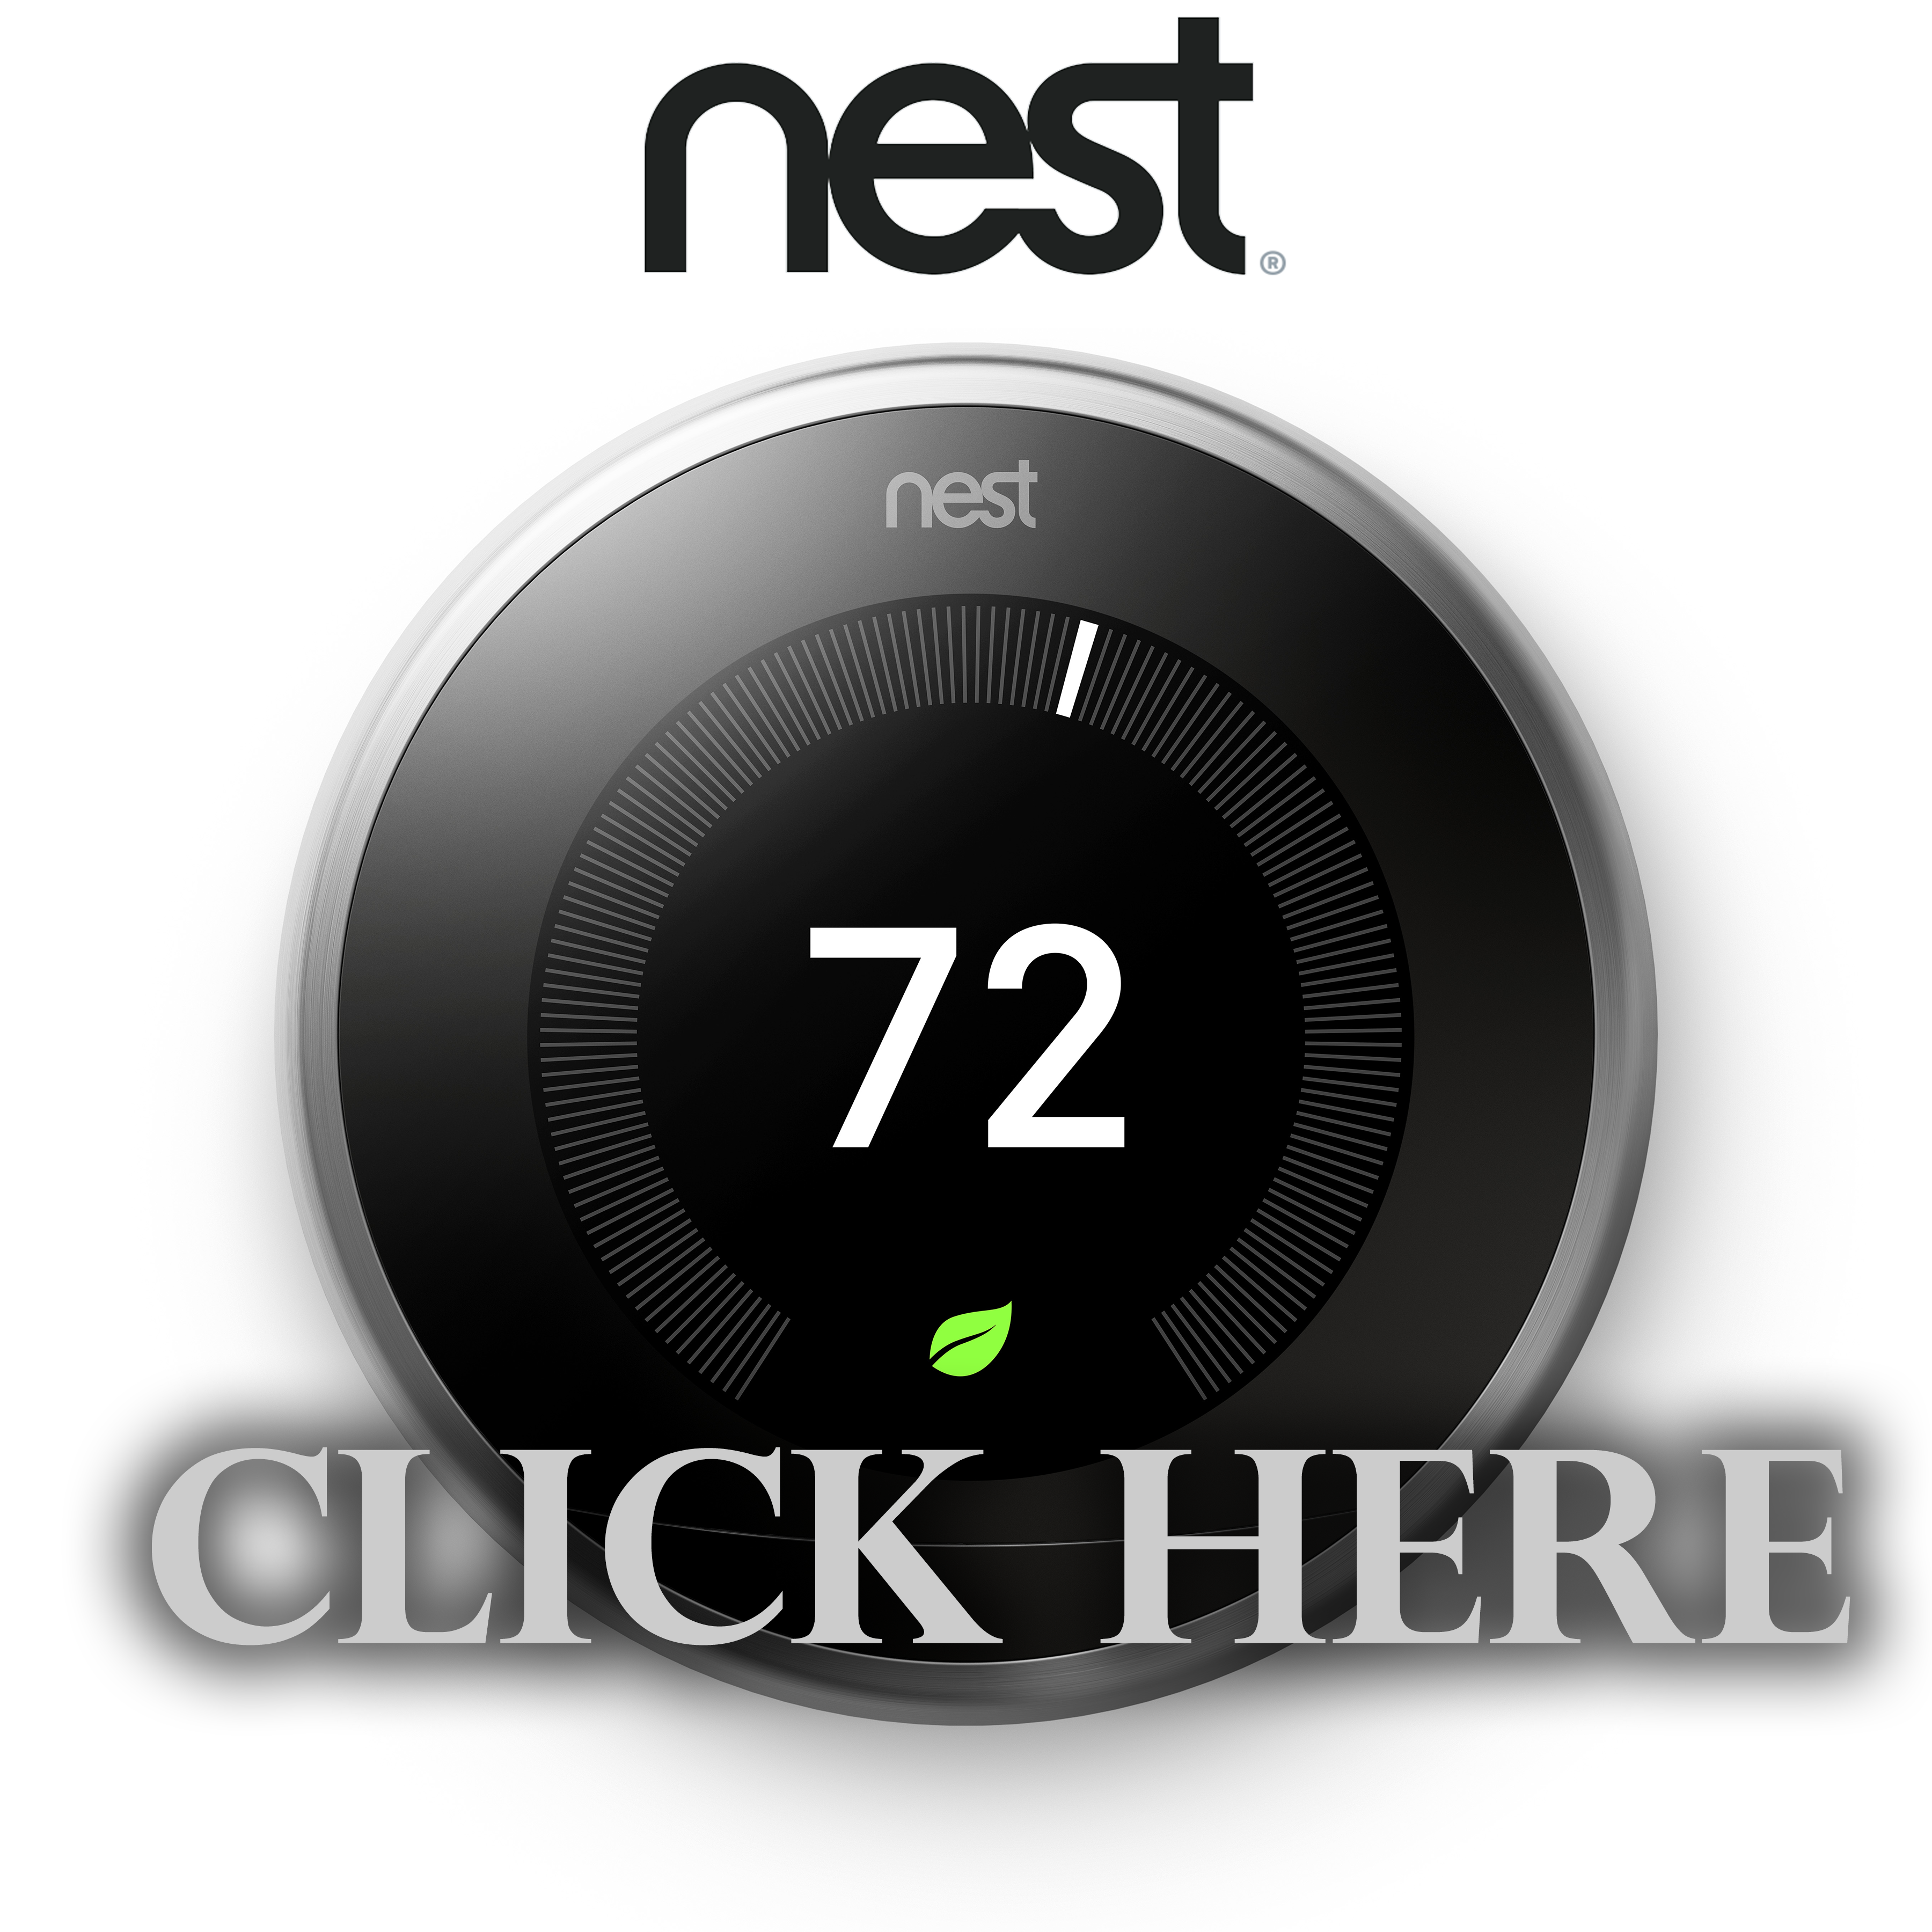 Click this nest thermostat to sign up for Rush Hour Rewards